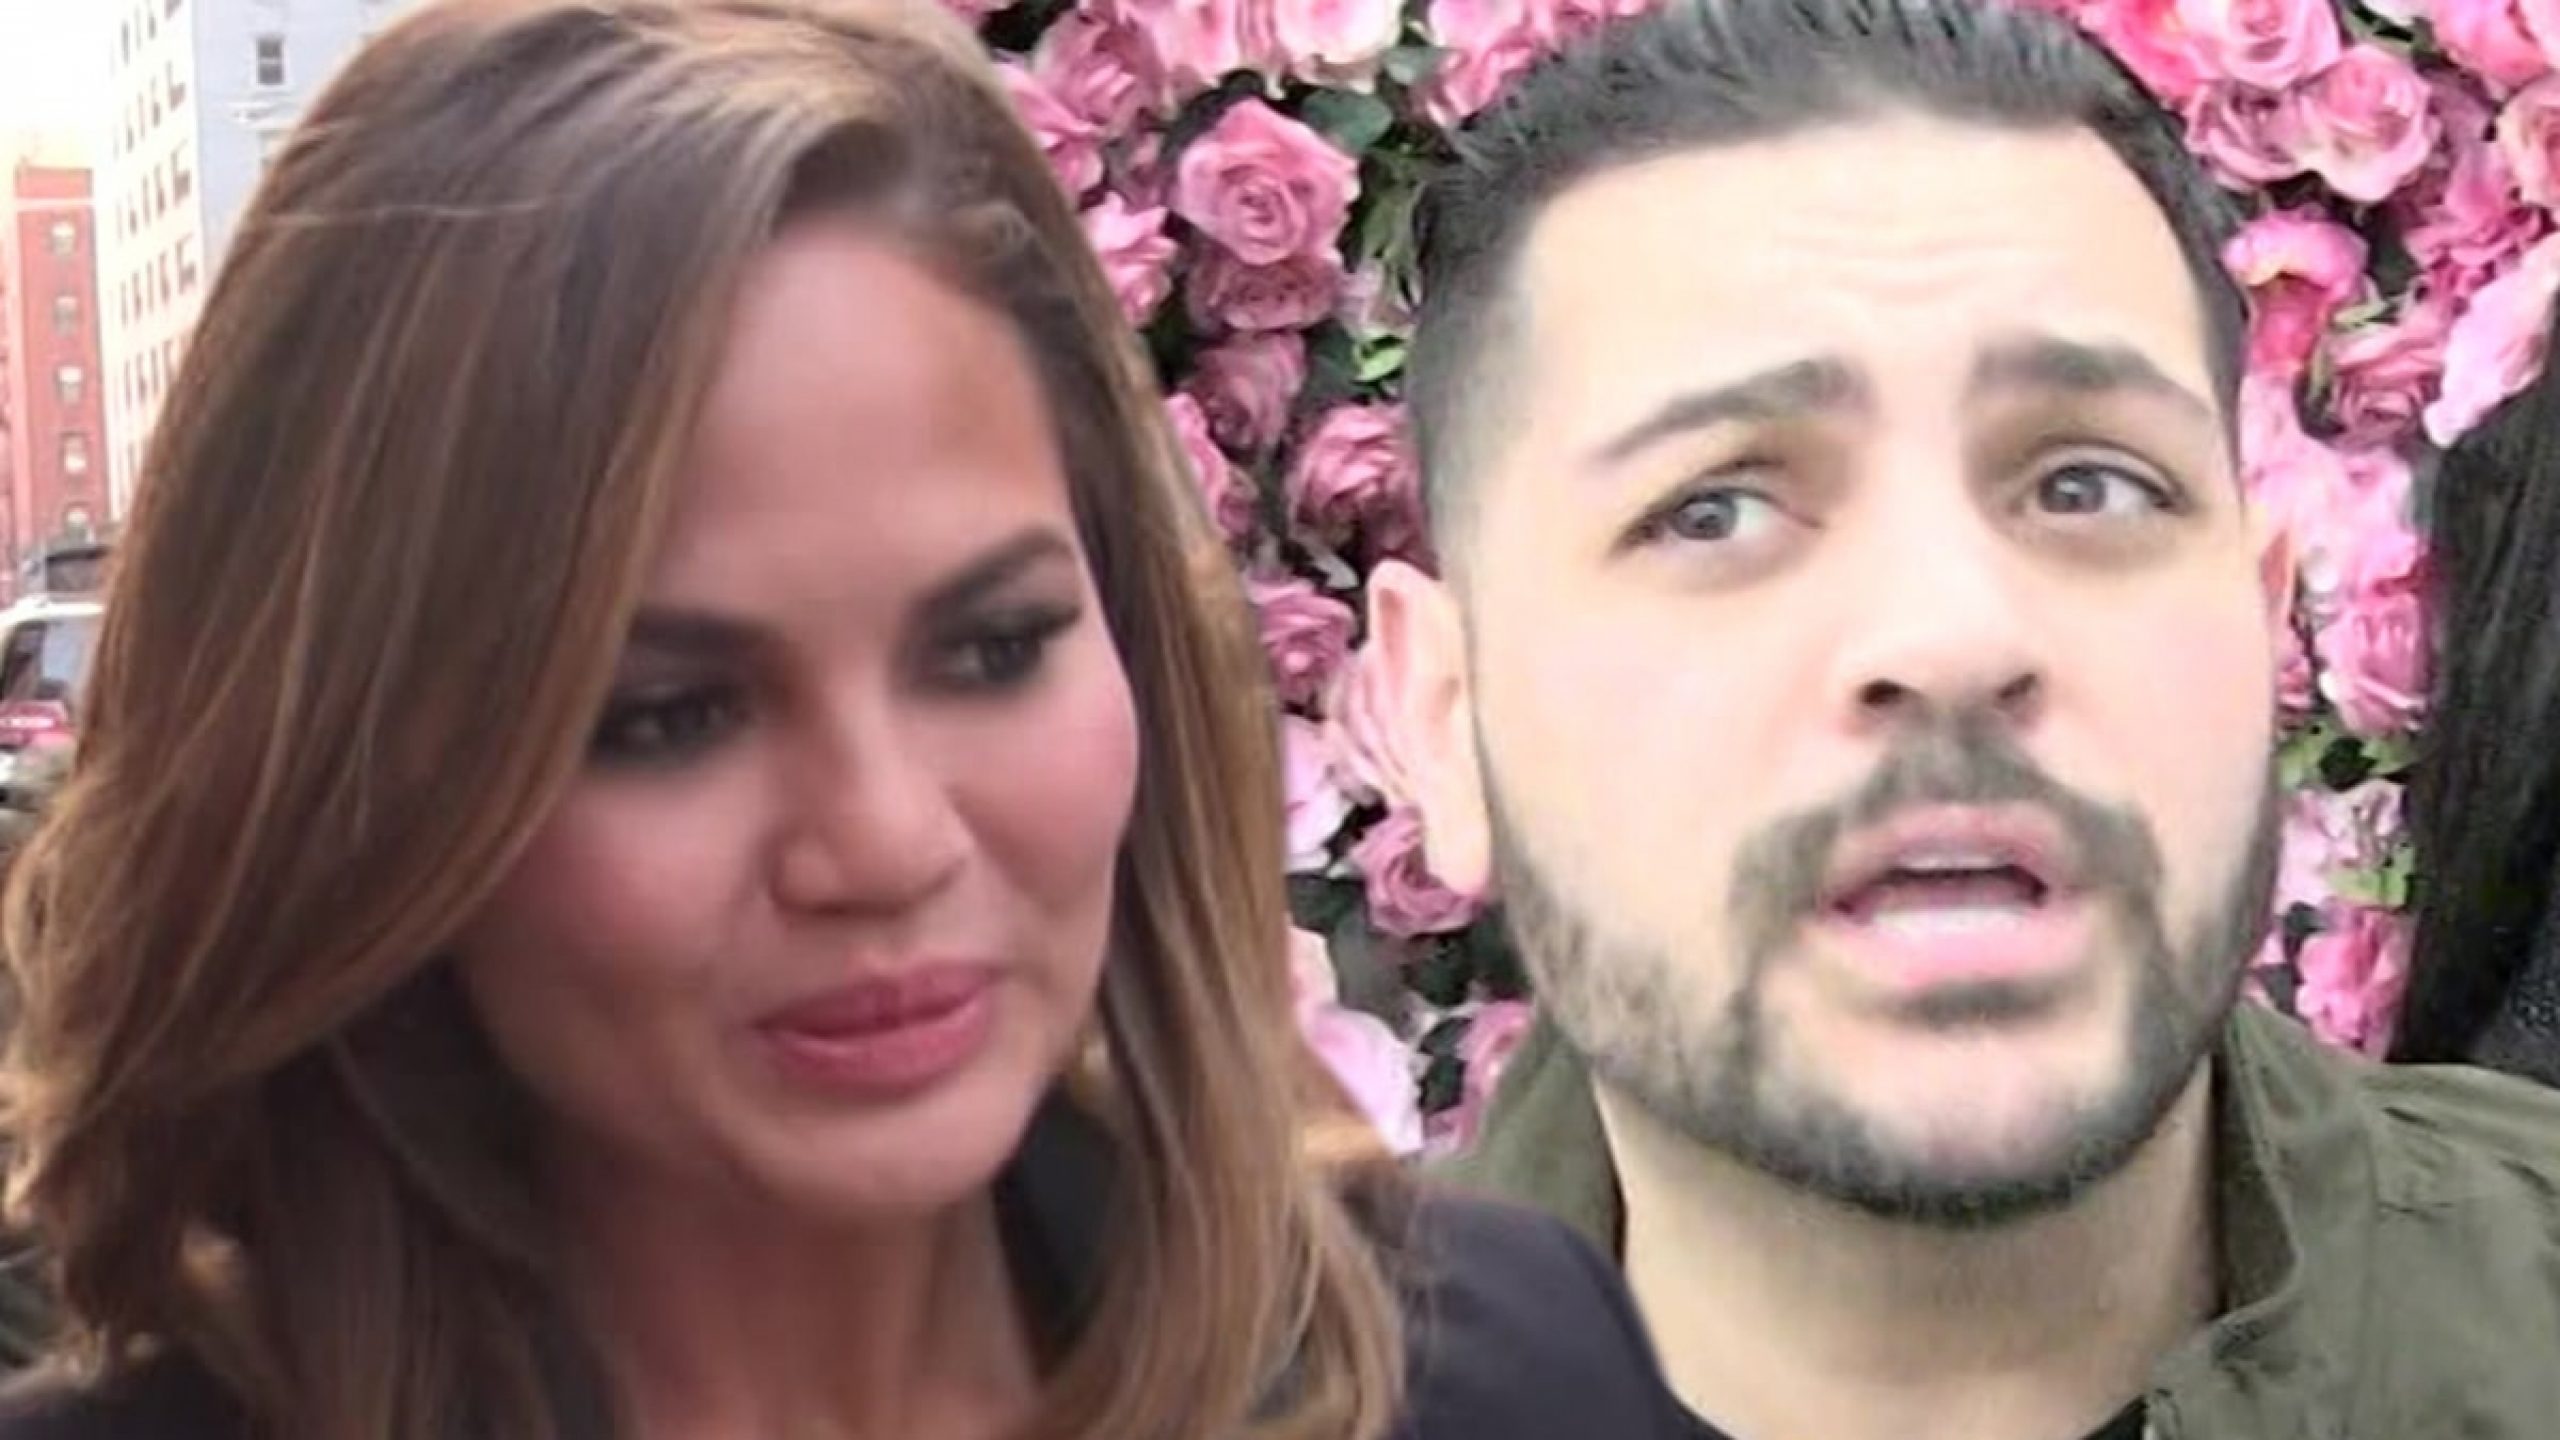 Chrissy Teigen Rips Michael Costello, ‘No Idea What the F***’ He’s Doing